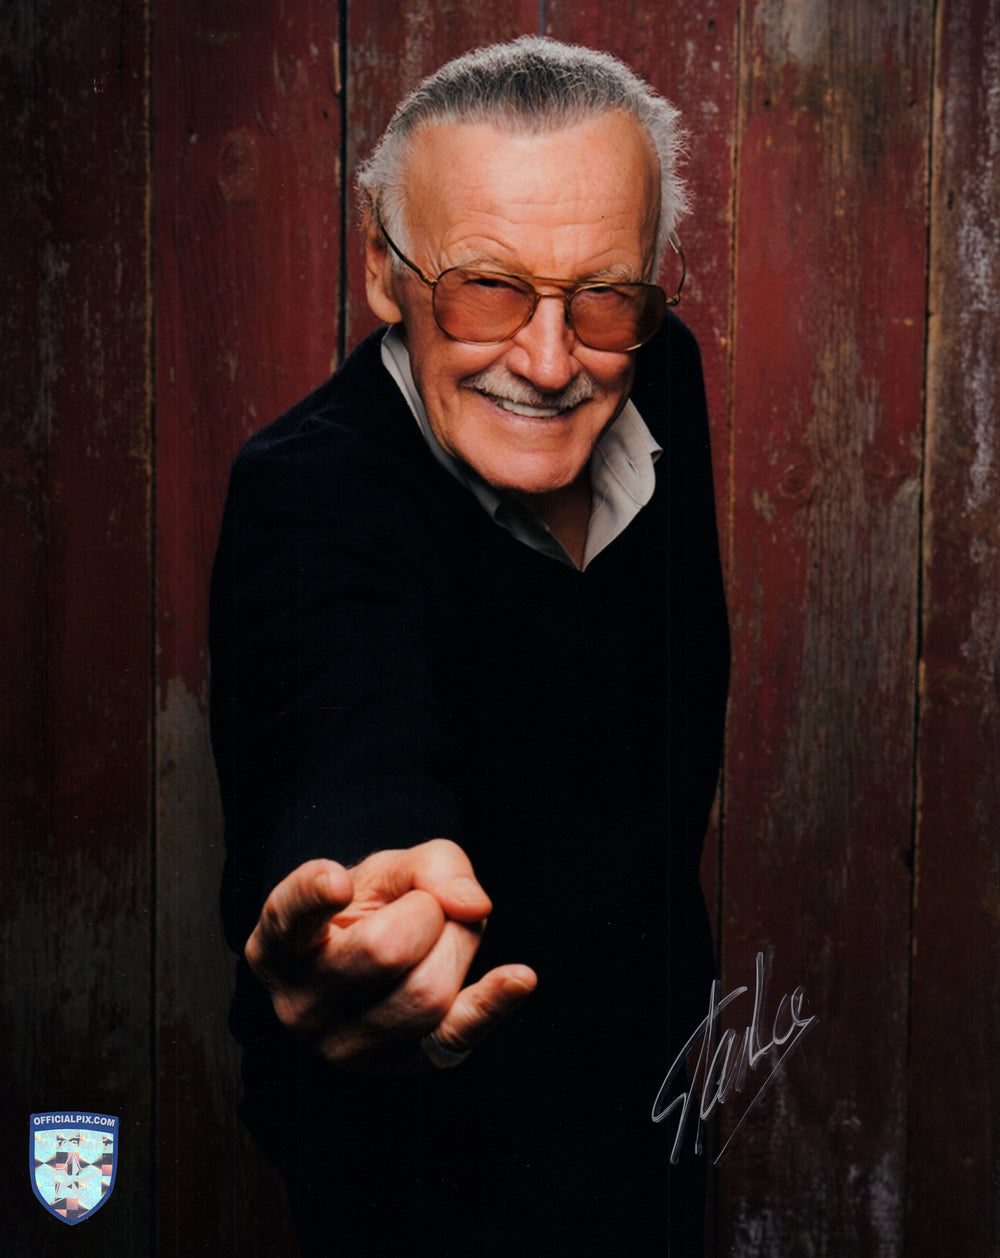 Stan Lee Creator of Marvel Characters: Spider-Man, the X-Men, Iron Man, Thor, the Hulk, Ant-Man, the Wasp, the Fantastic Four, Black Panther, Daredevil, Doctor Strange, the Scarlet Witch, Black Widow, & Many More (Official Pix) Signed 11x14 Photo